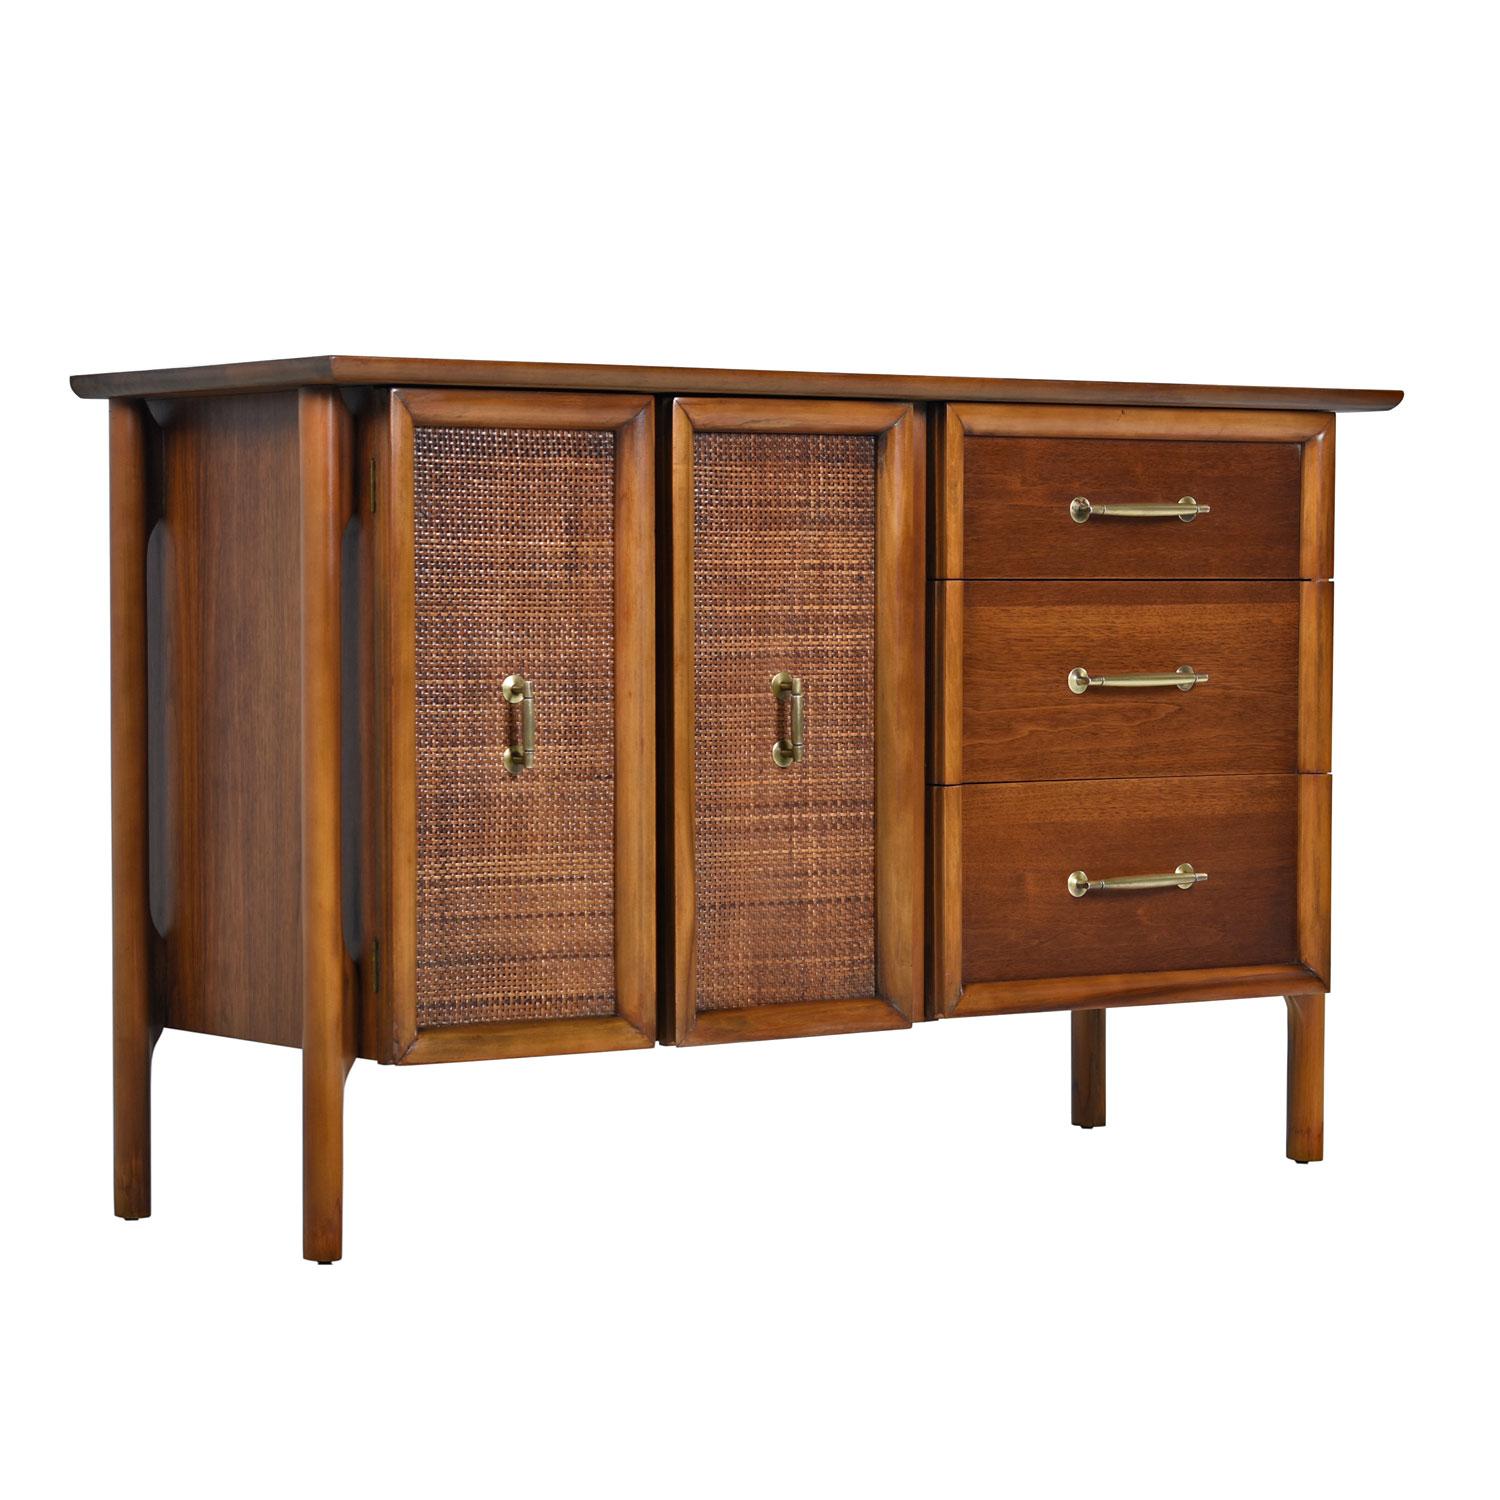 Restored, Mid-Century Modern credenza with cane front cabinet doors and sleek brass accent handle hardware. Quality American construction paired with refined esthetic. We love this piece. The 4-post architectural design is inspired by the works of